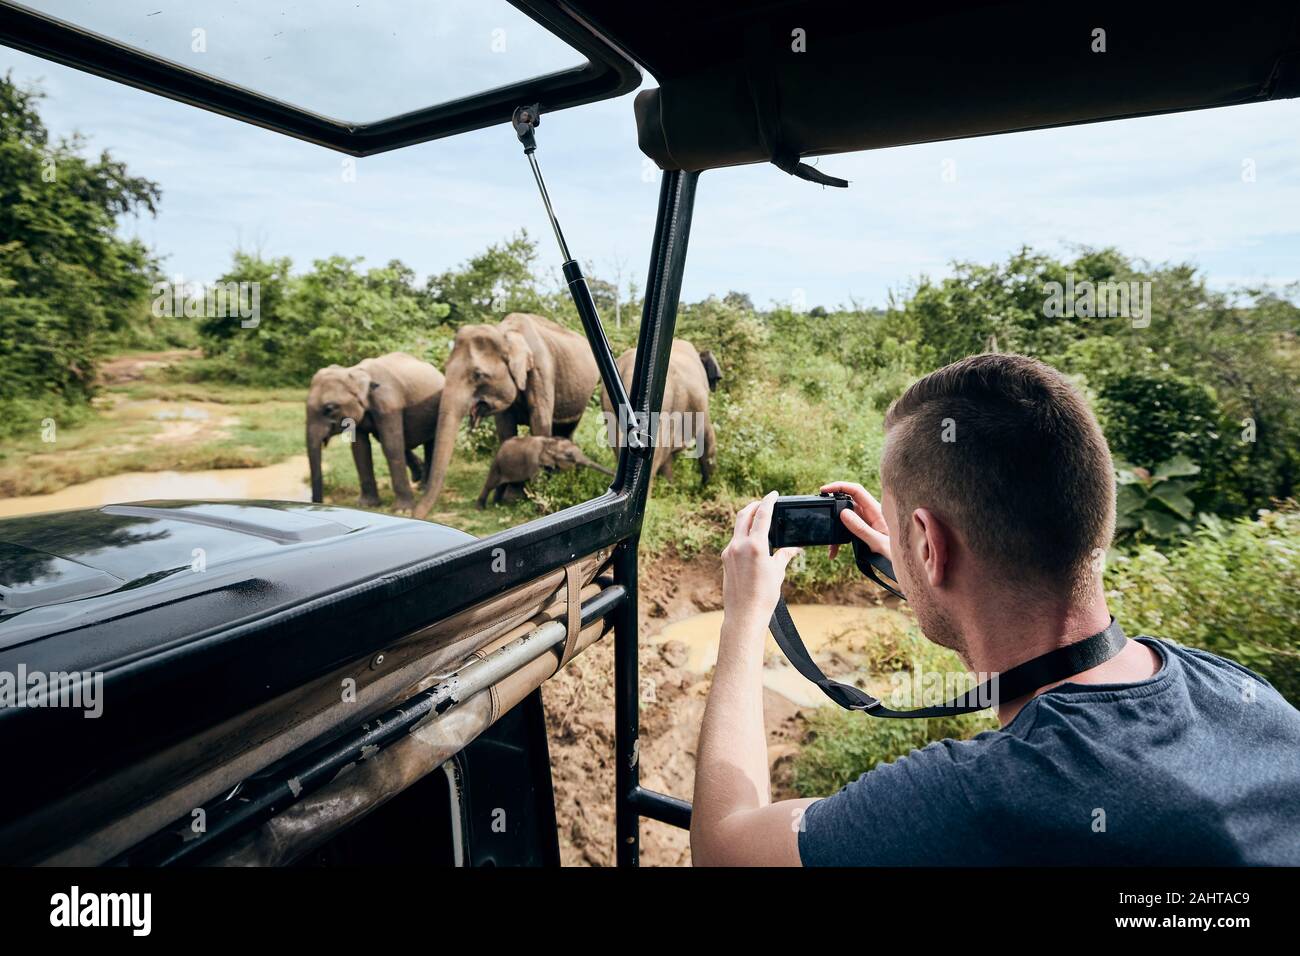 Photographing of group of elephants. Young man on safari journey by off-road car in Sri Lanka. Stock Photo